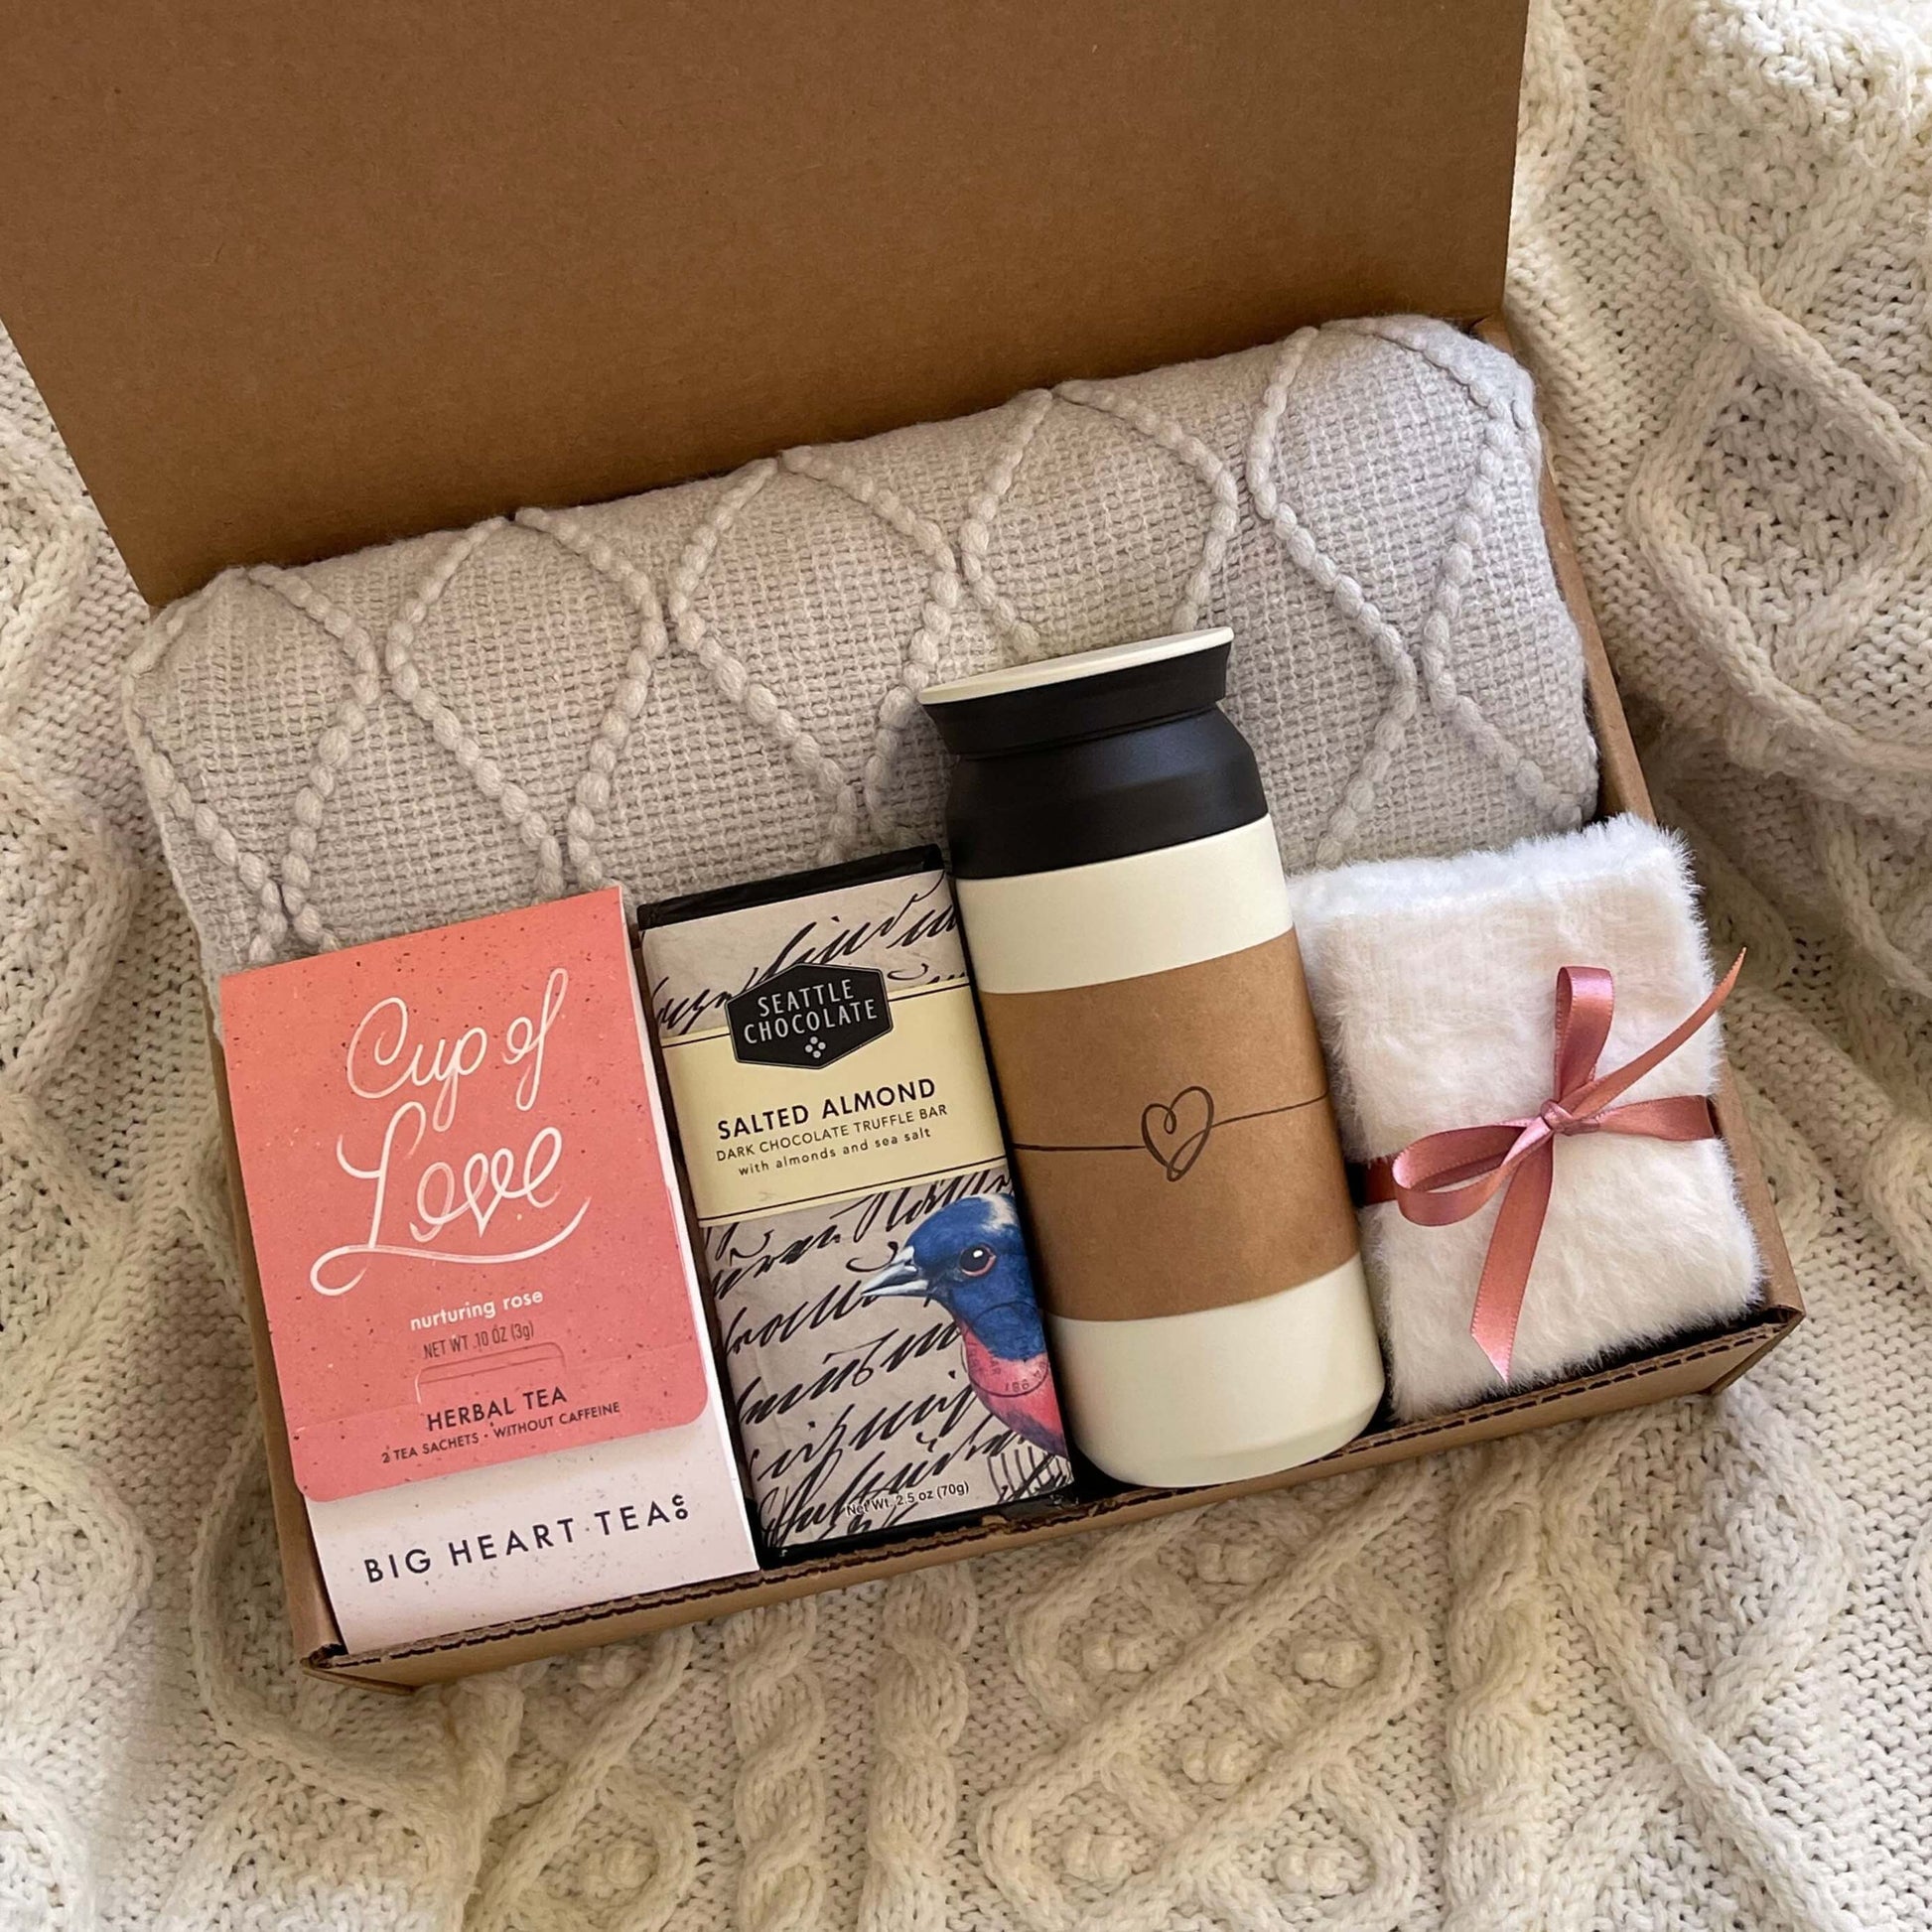 Cozy Hygge Gift Box, Self Care Gift, Gift for Women, Gift Idea, Fall Gift,  Hygge Gift Box, Sympathy Gift, Gift Basket, Care Package for Her 